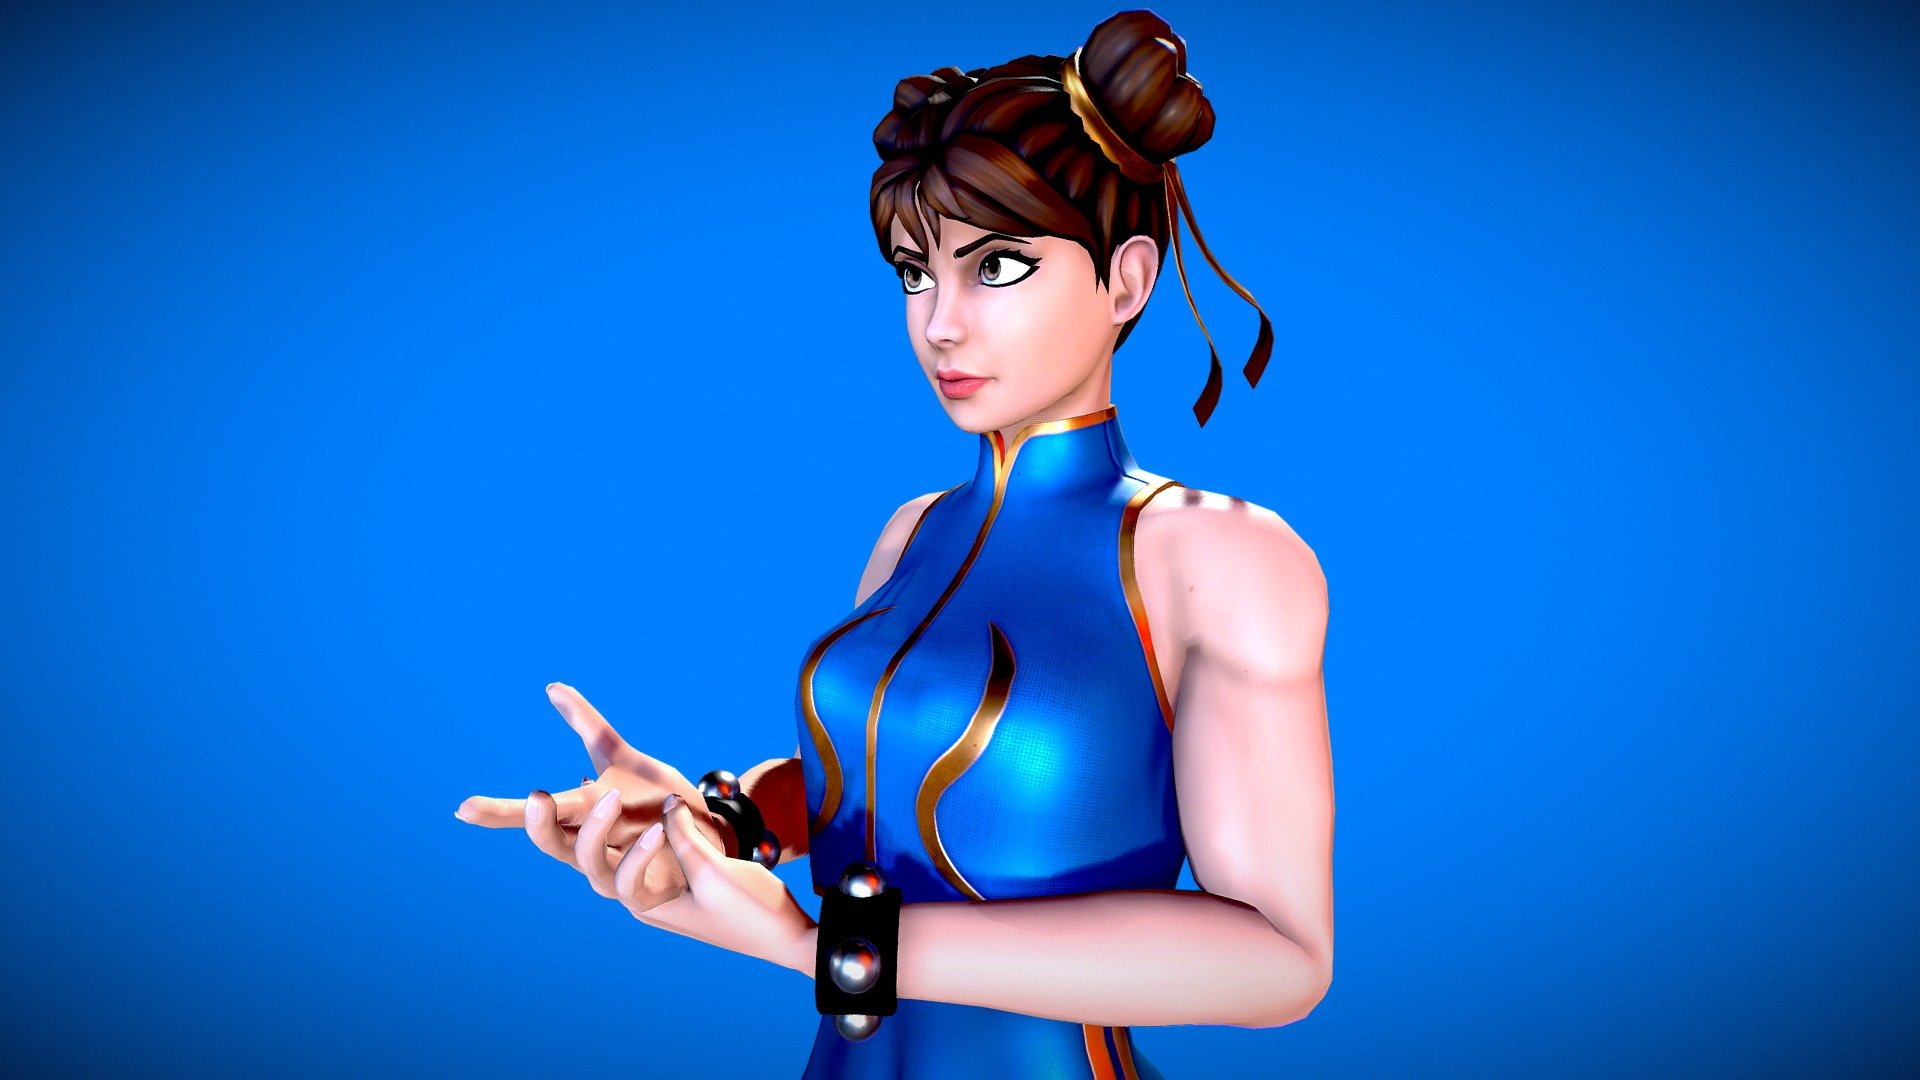 Chun Li and Cammy Street Fighter Fortnite free VR / AR / low-poly